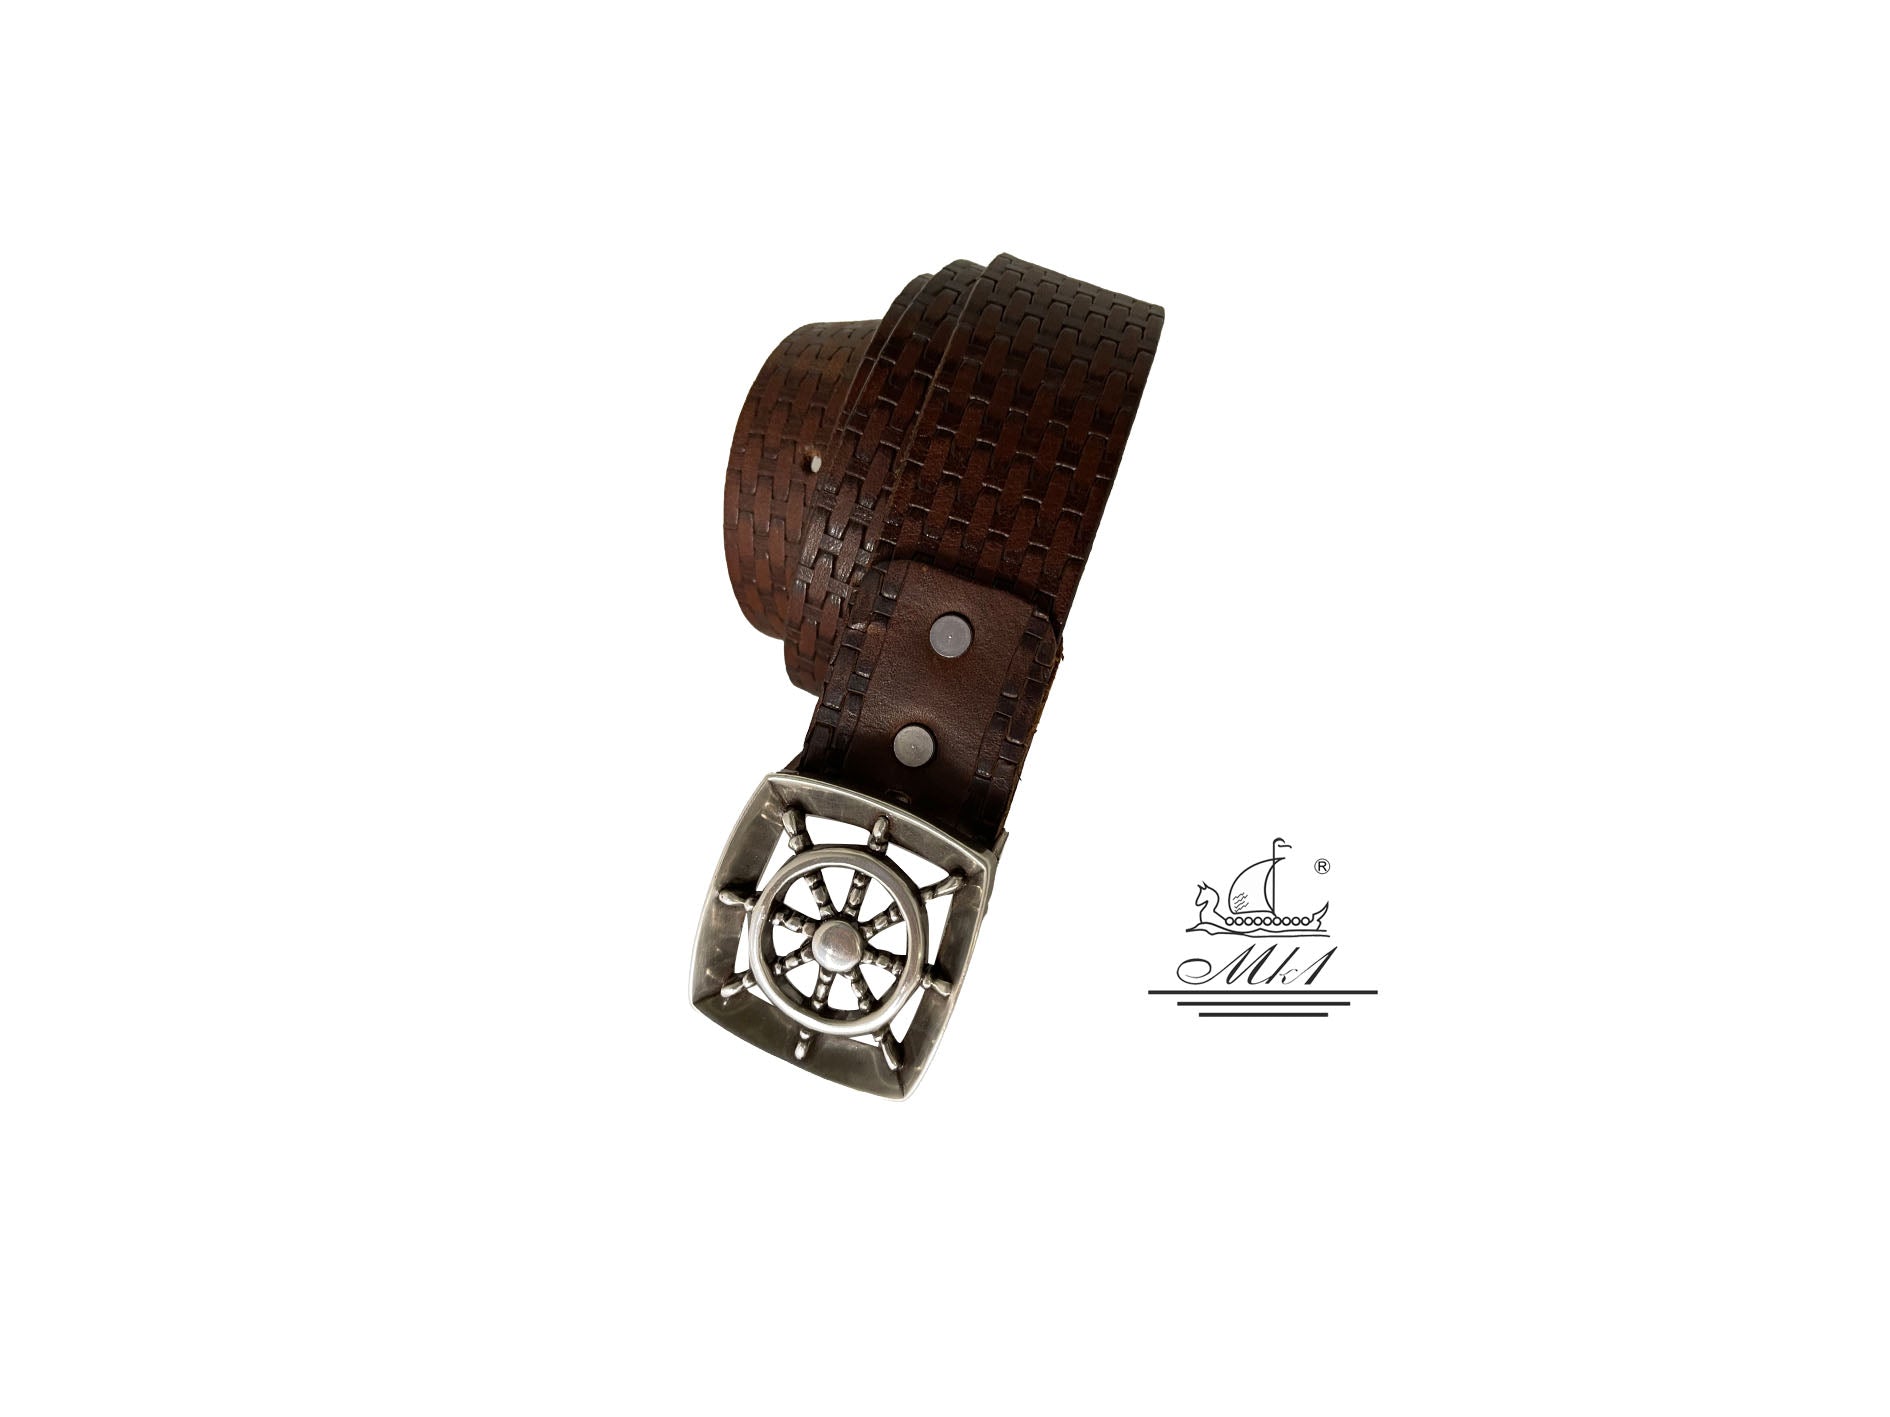 Handmade casual leather belt in brown colour with relief design.101232/40BR/DR